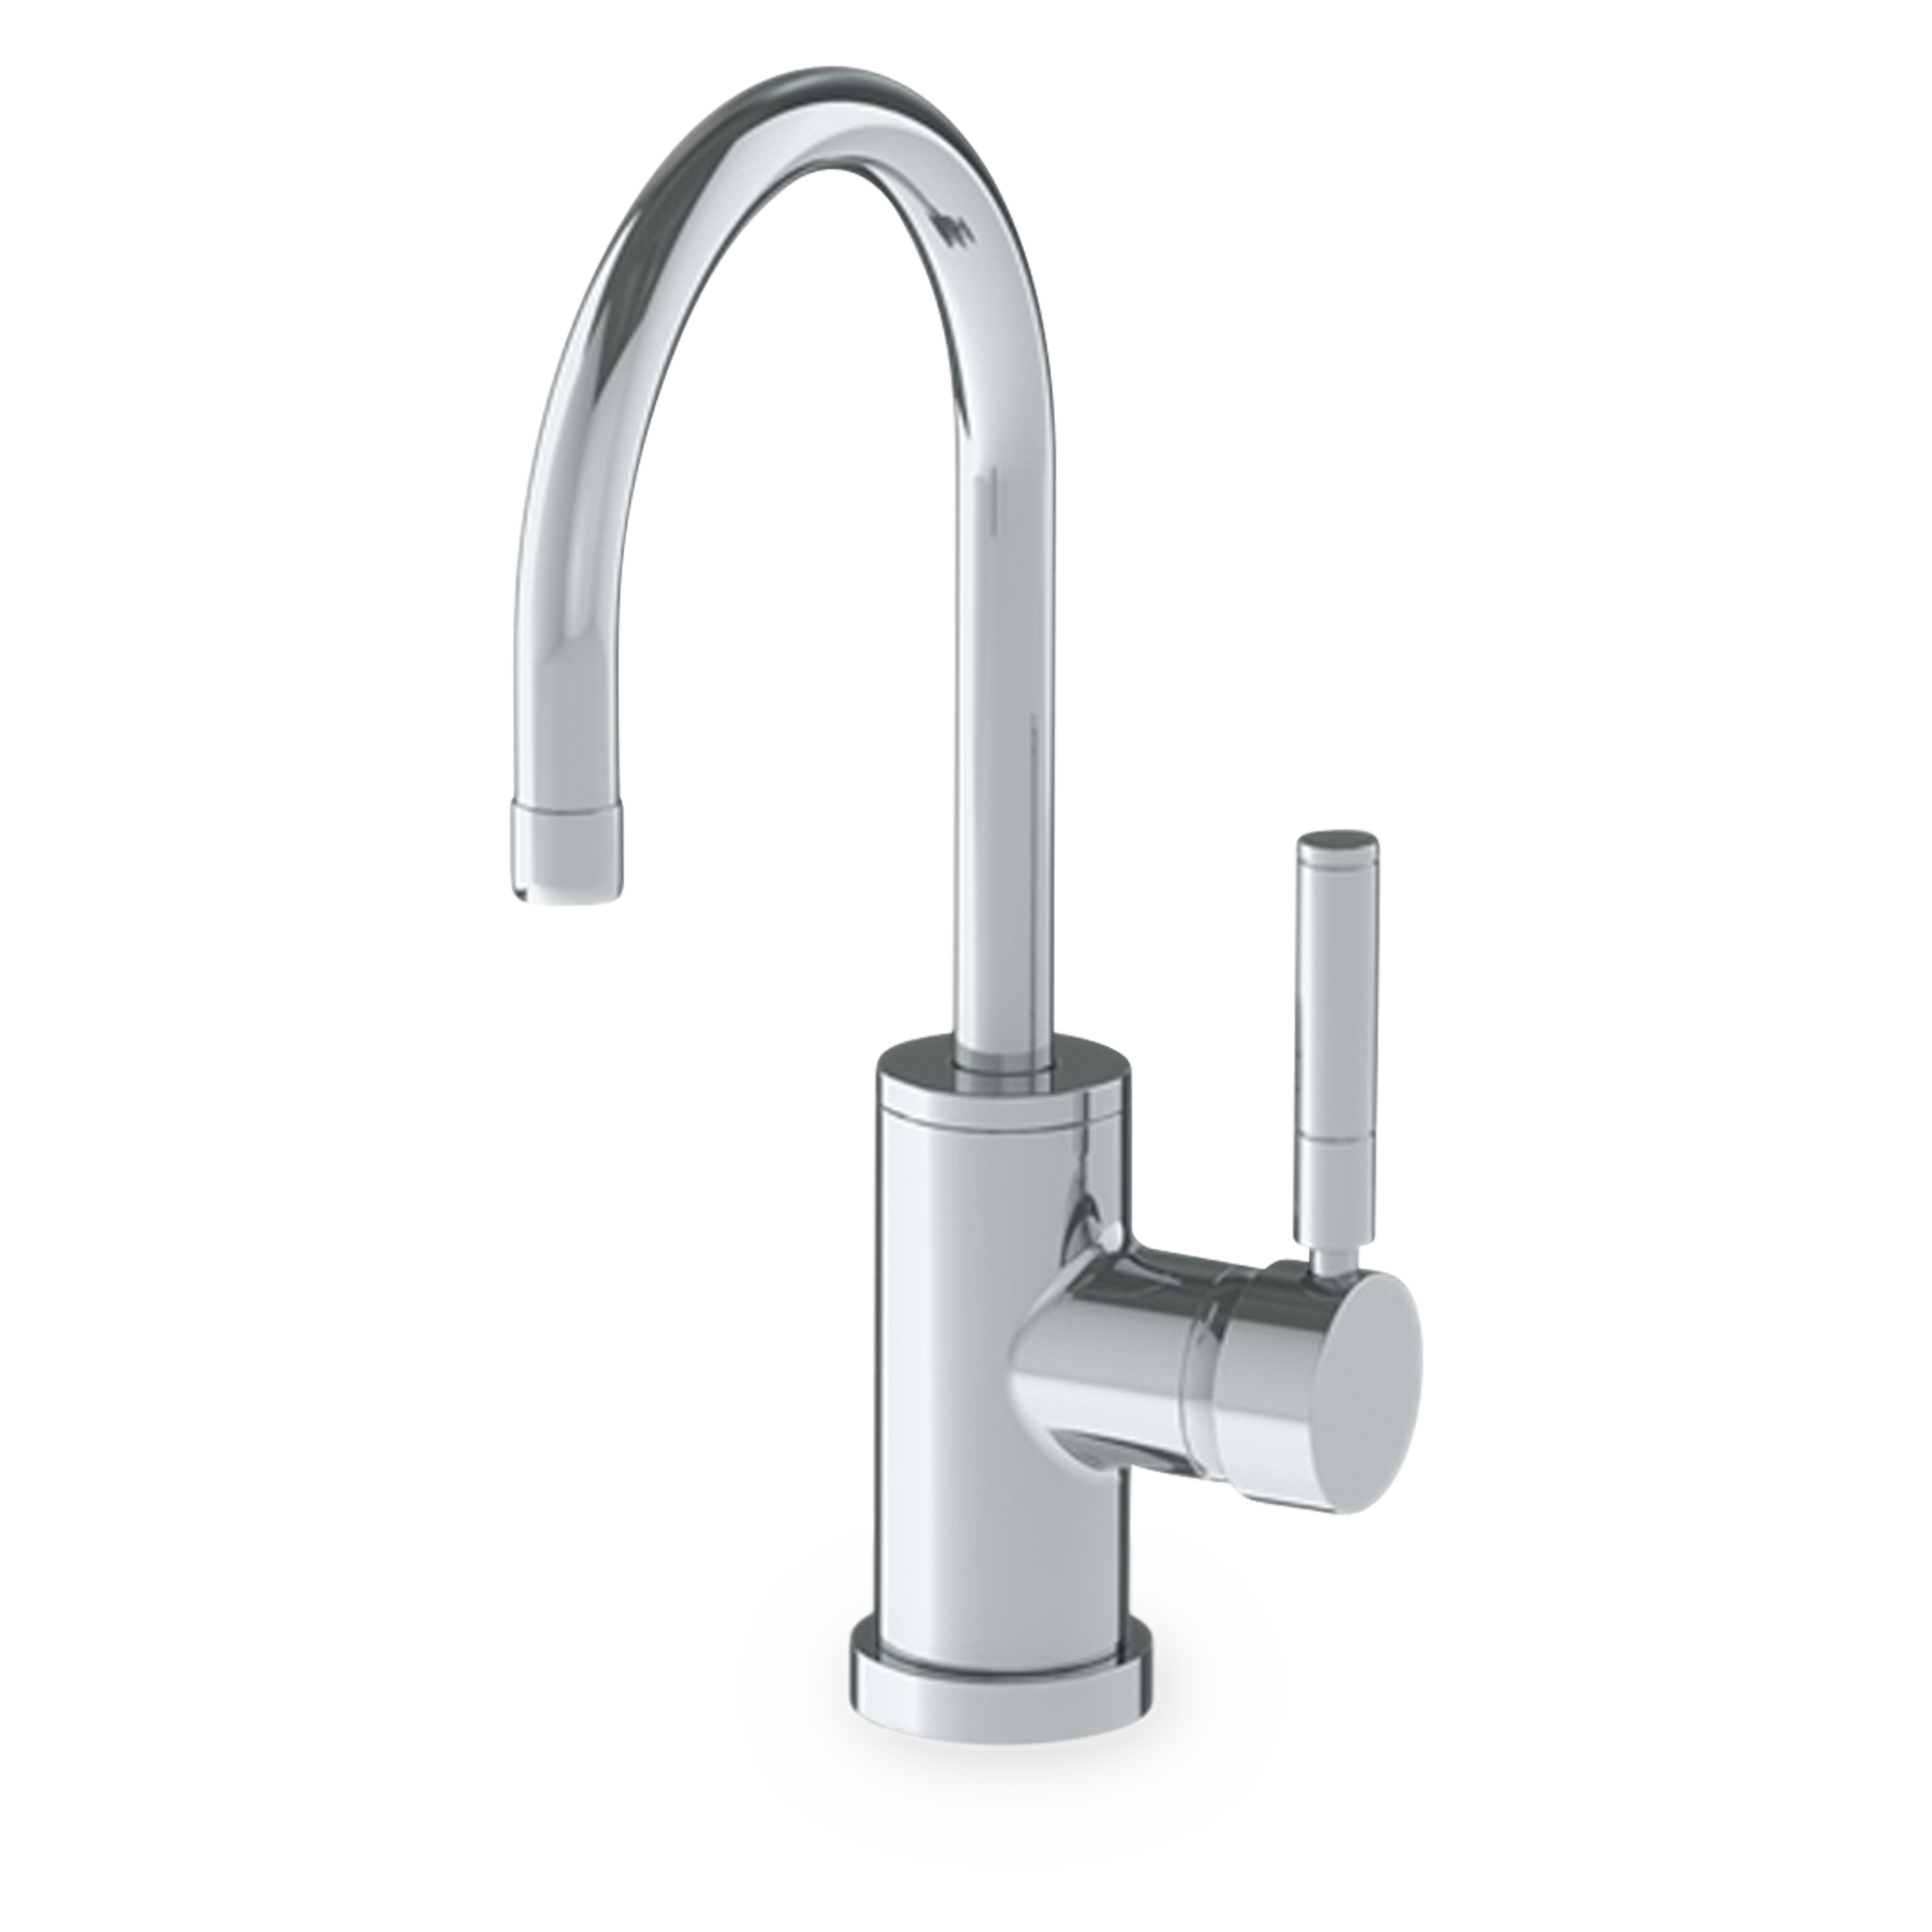 A gorgeous single lever bar faucet with clean lines and a gorgeous design.